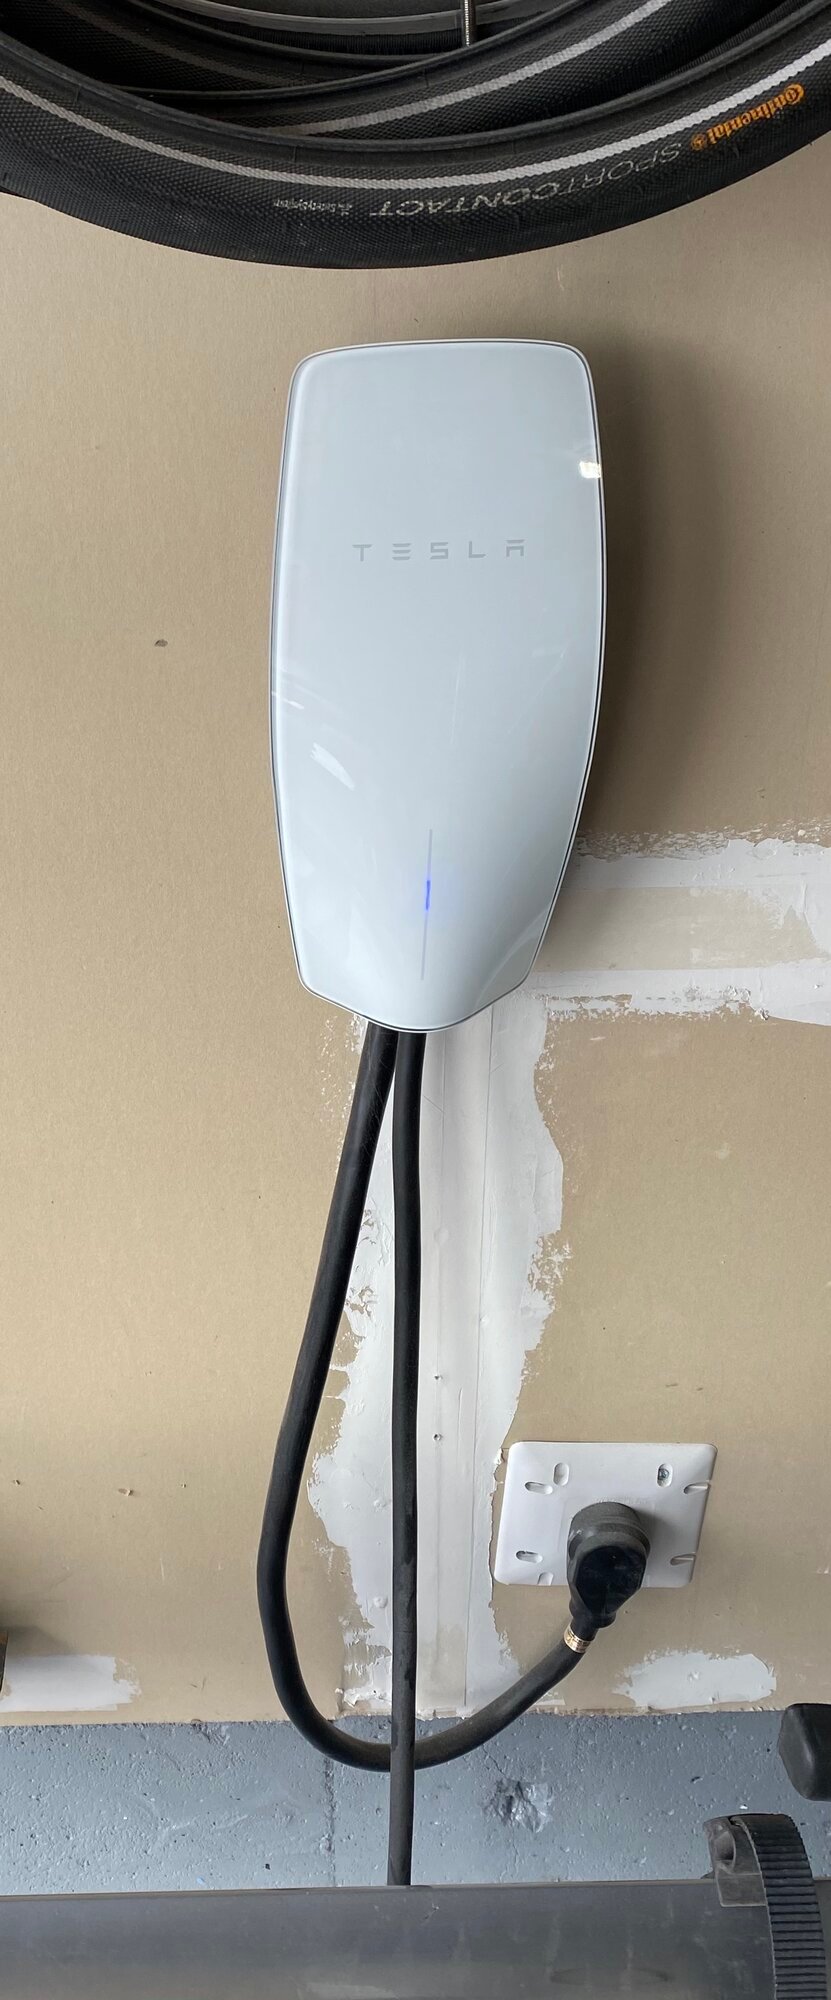 How to Install Tesla Wall Connector Gen 3 - Step By Step Guide